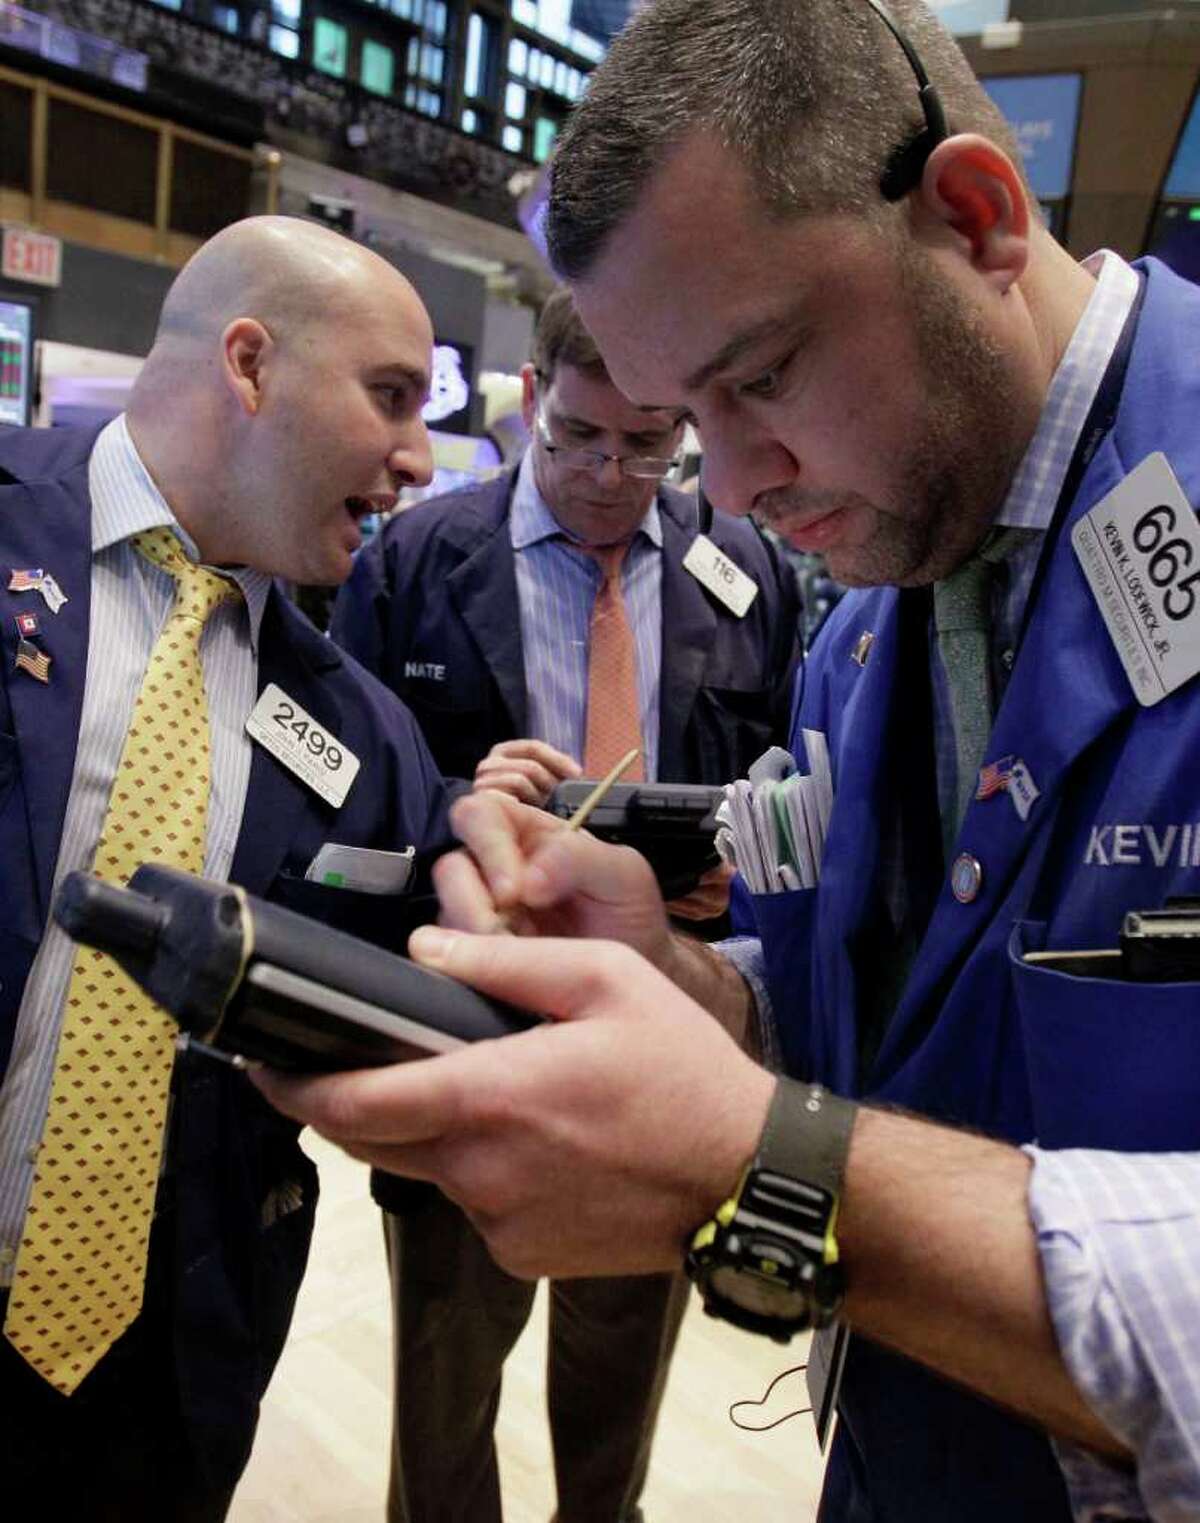 FILE - In this Jan. 10, 2012 file photo, trader Kevin Lodewick, right, works on the floor of the New York Stock Exchange. Robust growth in China helped stock markets rally strongly Tuesday, Jan. 17, 2012, as investor fears of an abrupt slowdown in the world's second-largest economy were eased. (AP Photo/Richard Drew, File)